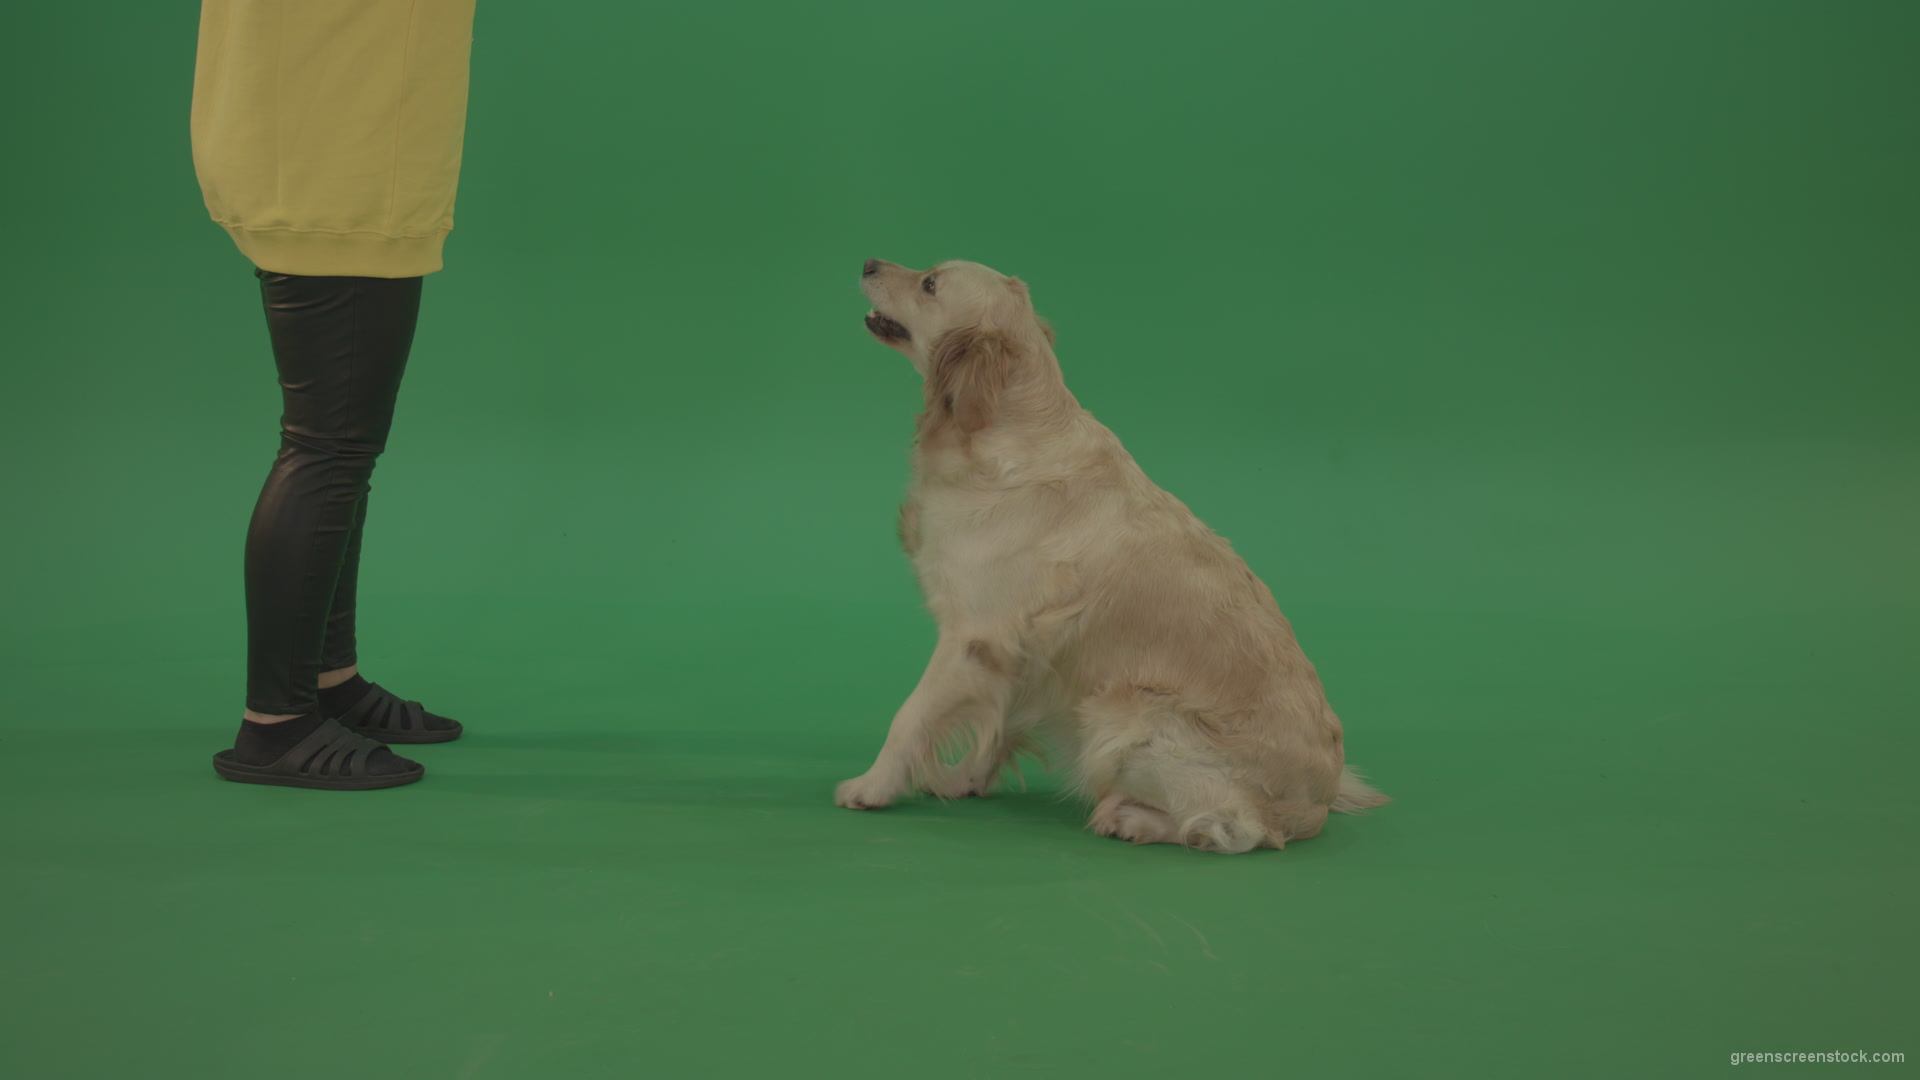 Golden-Retriever-hunter-Bird-Dog-sit-and-barking-to-owner-isolated-on-green-screen-4K-video-footage_002 Green Screen Stock